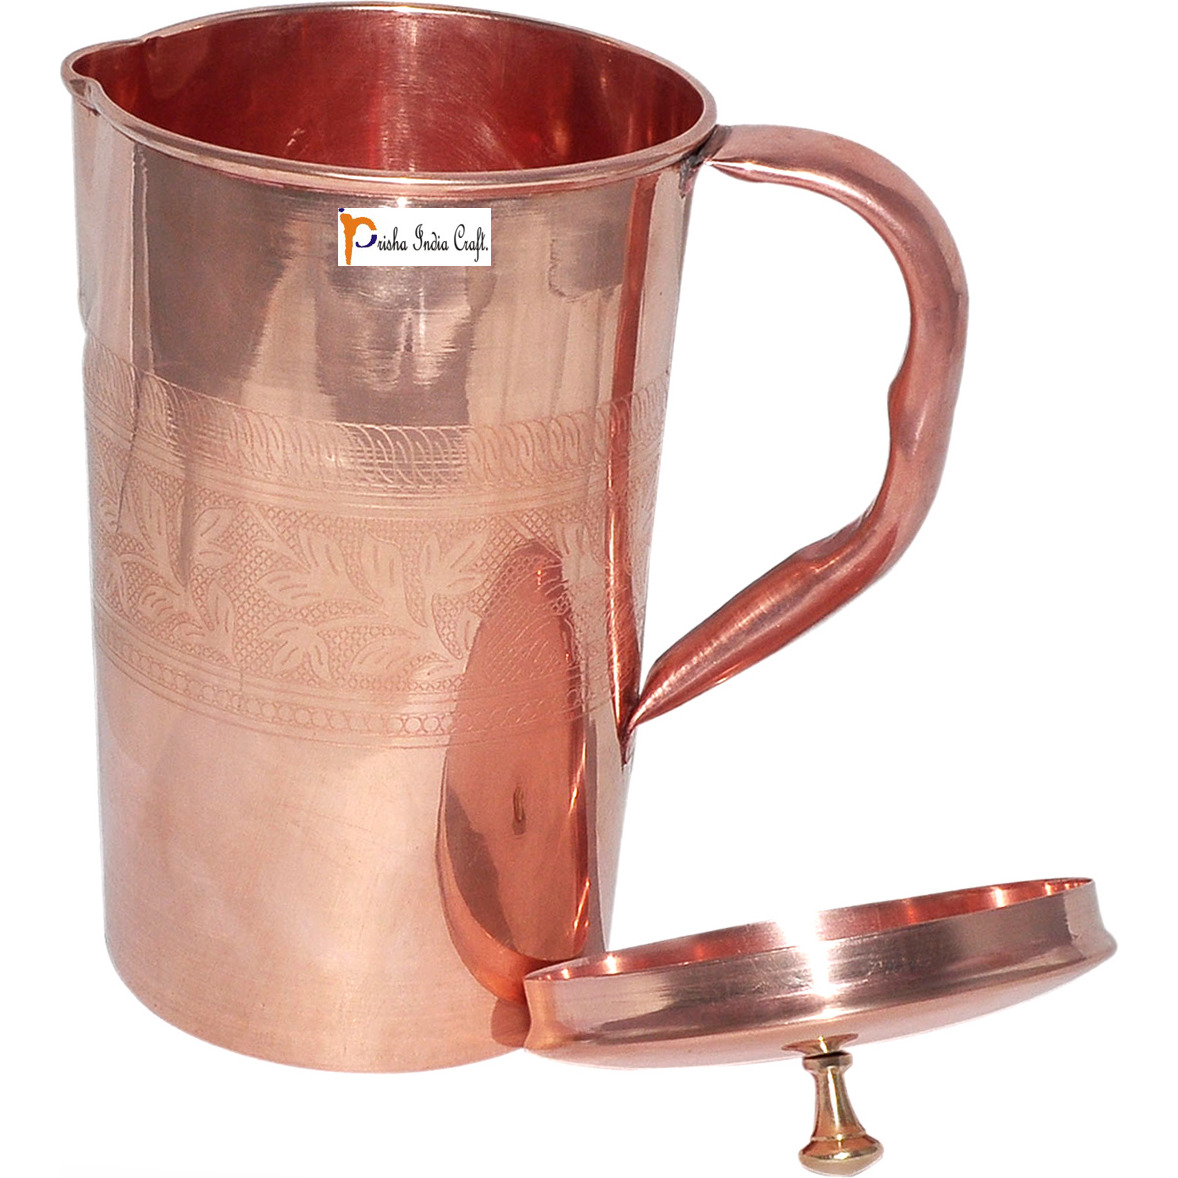 Prisha India Craft B. Set of 2 Dinnerware Traditional Stainless Steel Copper Dinner Set of Thali Plate, Bowls, Glass and Spoons, Dia 13  With 1 Pure Copper Embossed Pitcher Jug - Christmas Gift